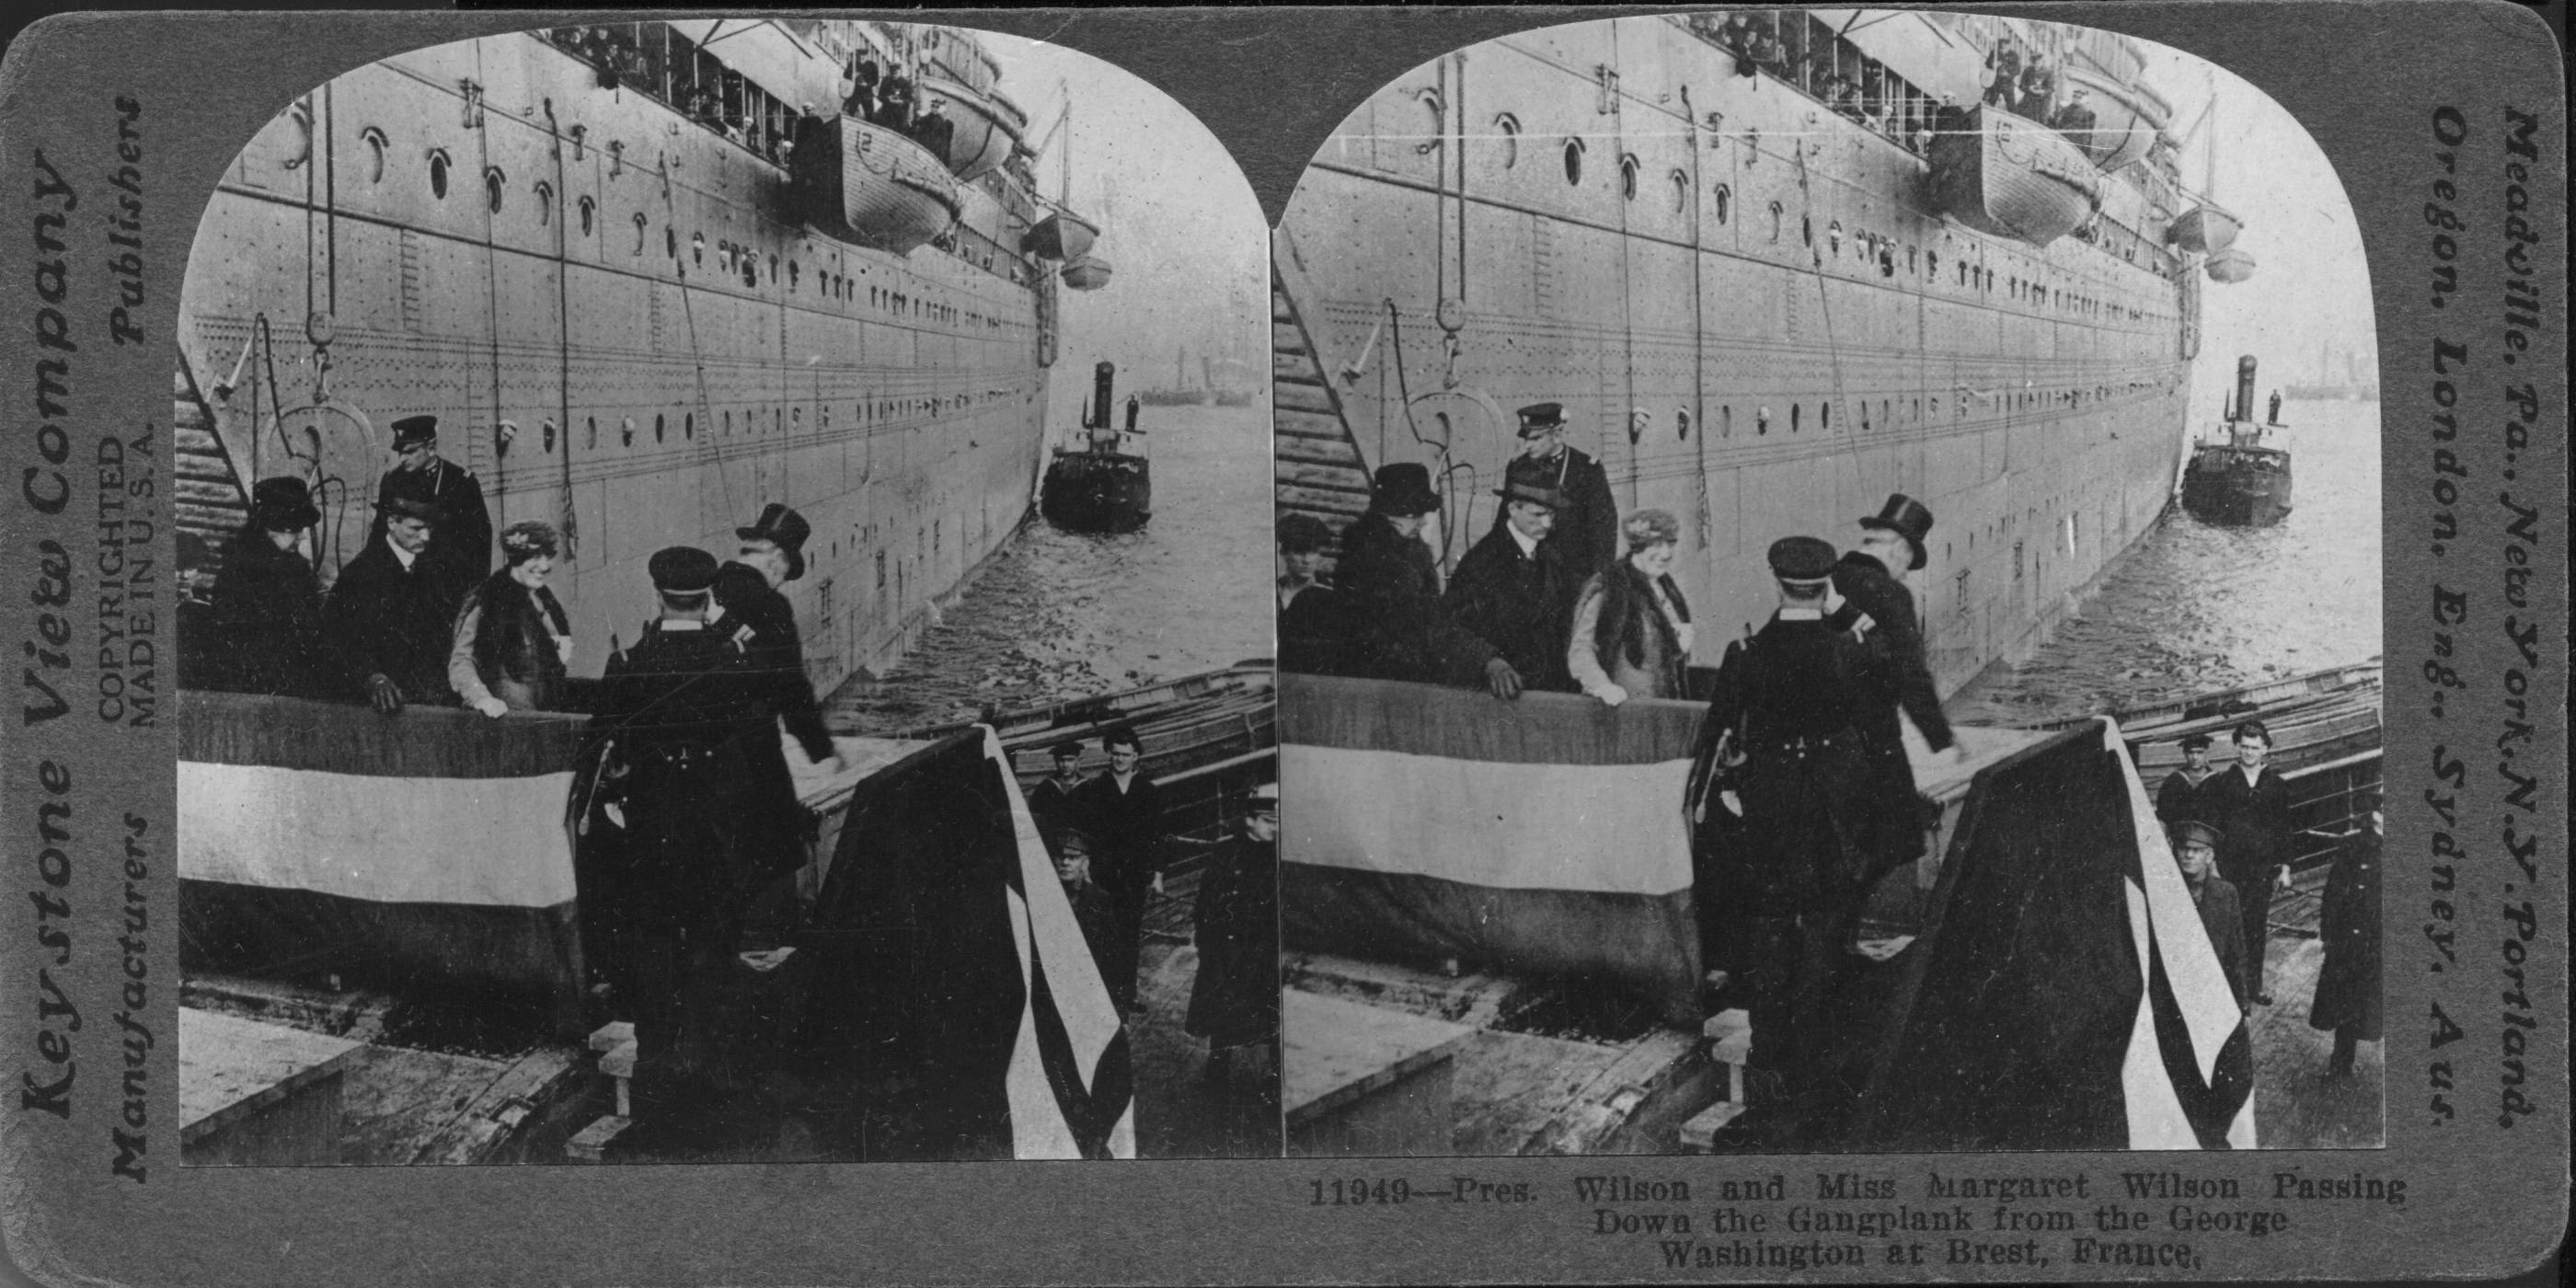 Pres. Wilson and Miss Margaret Wilson Passing Down the Gangplank from the George Washington at Brest